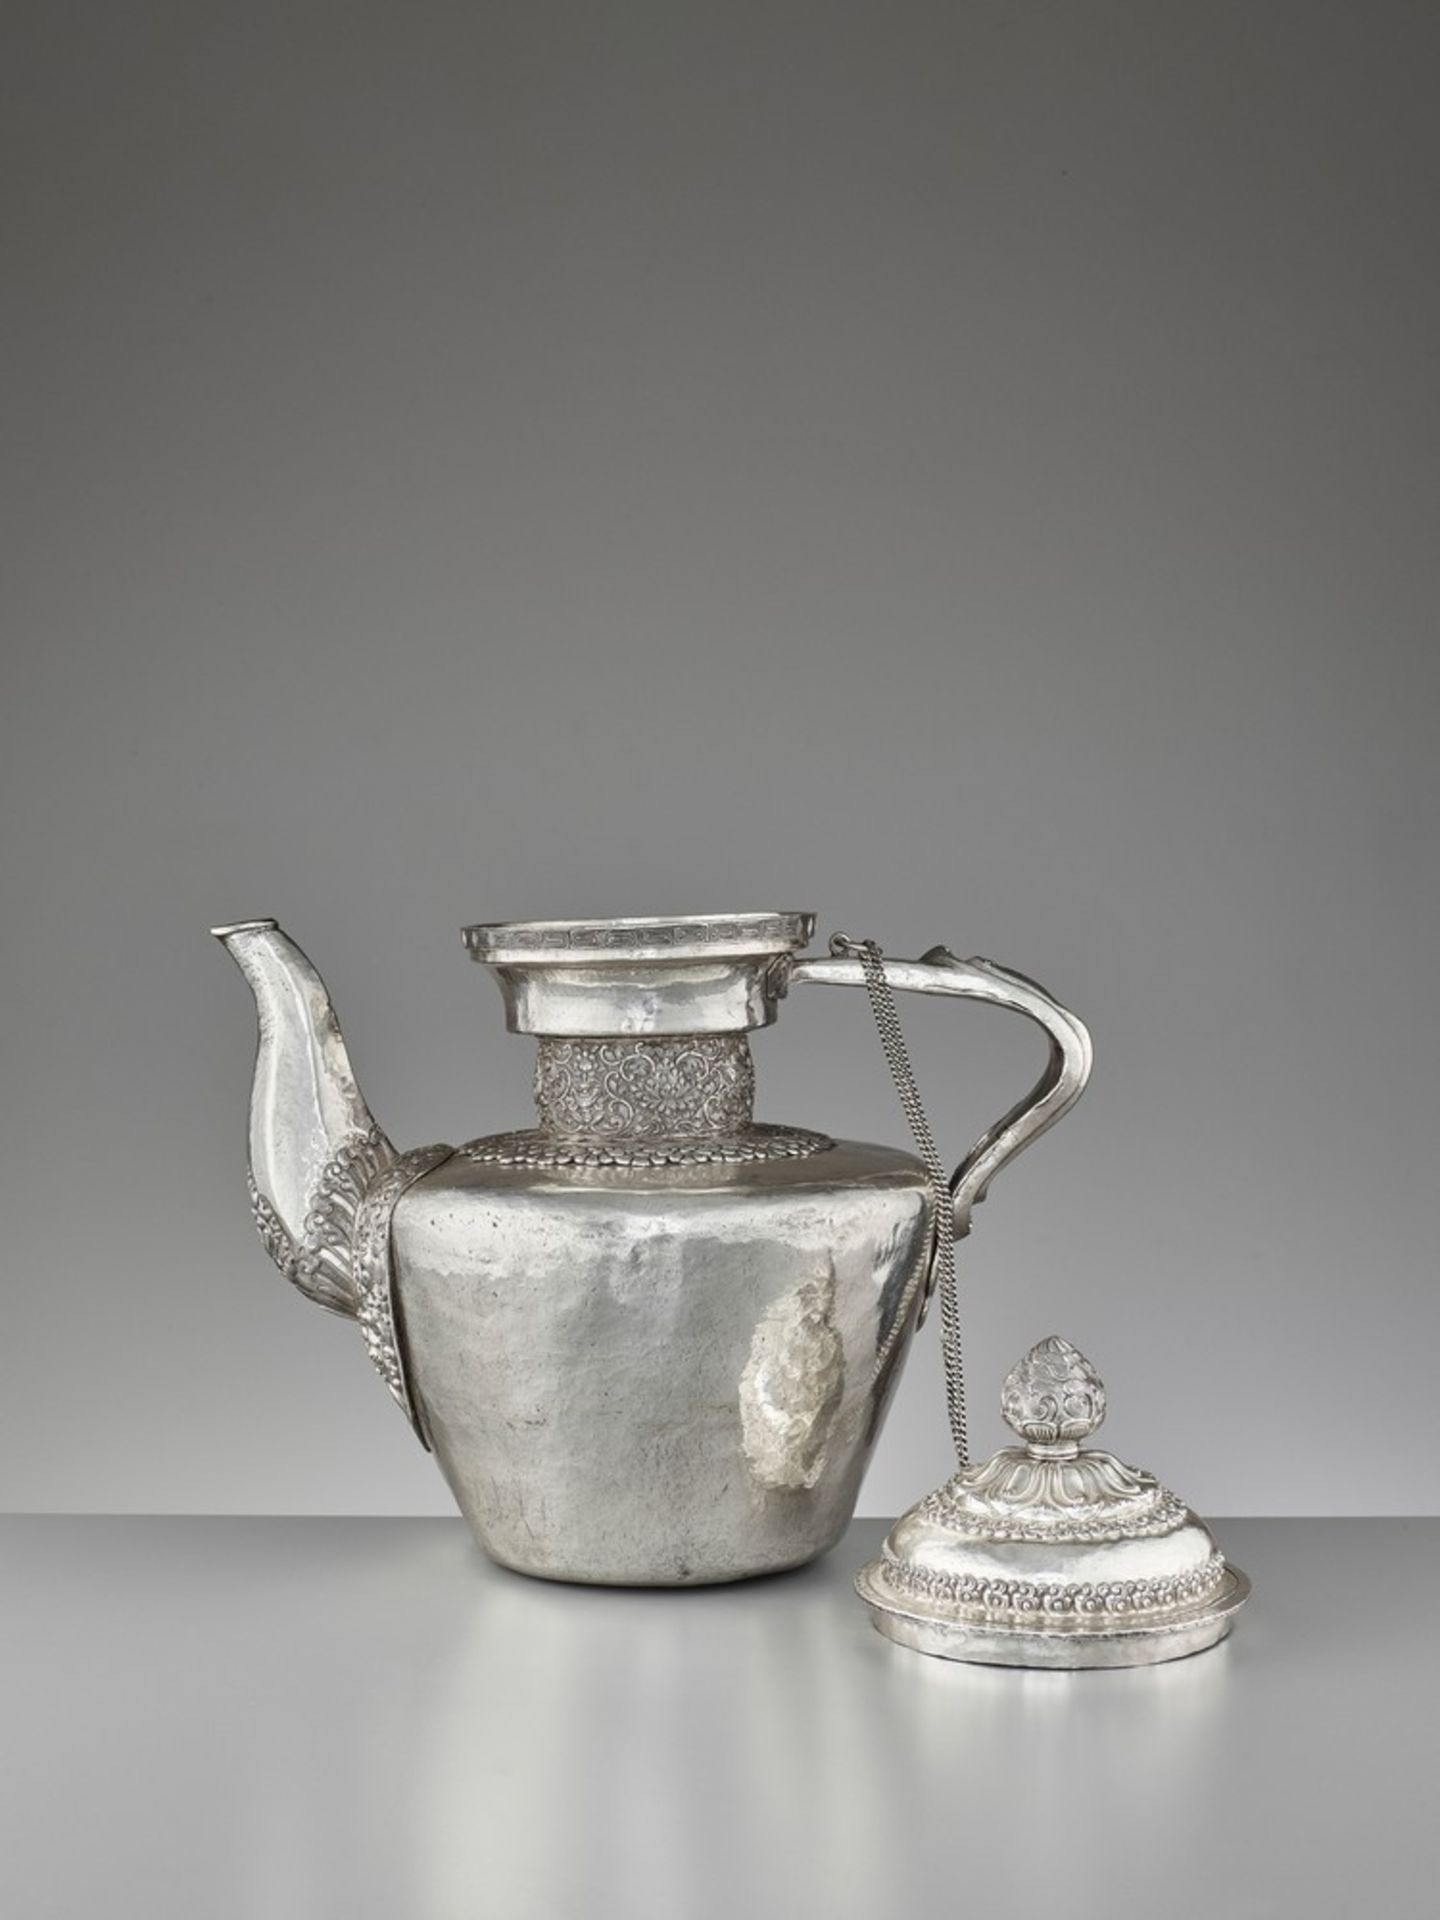 A LARGE SILVER TEAPOT AND COVER, QING DYNASTY - Image 3 of 11